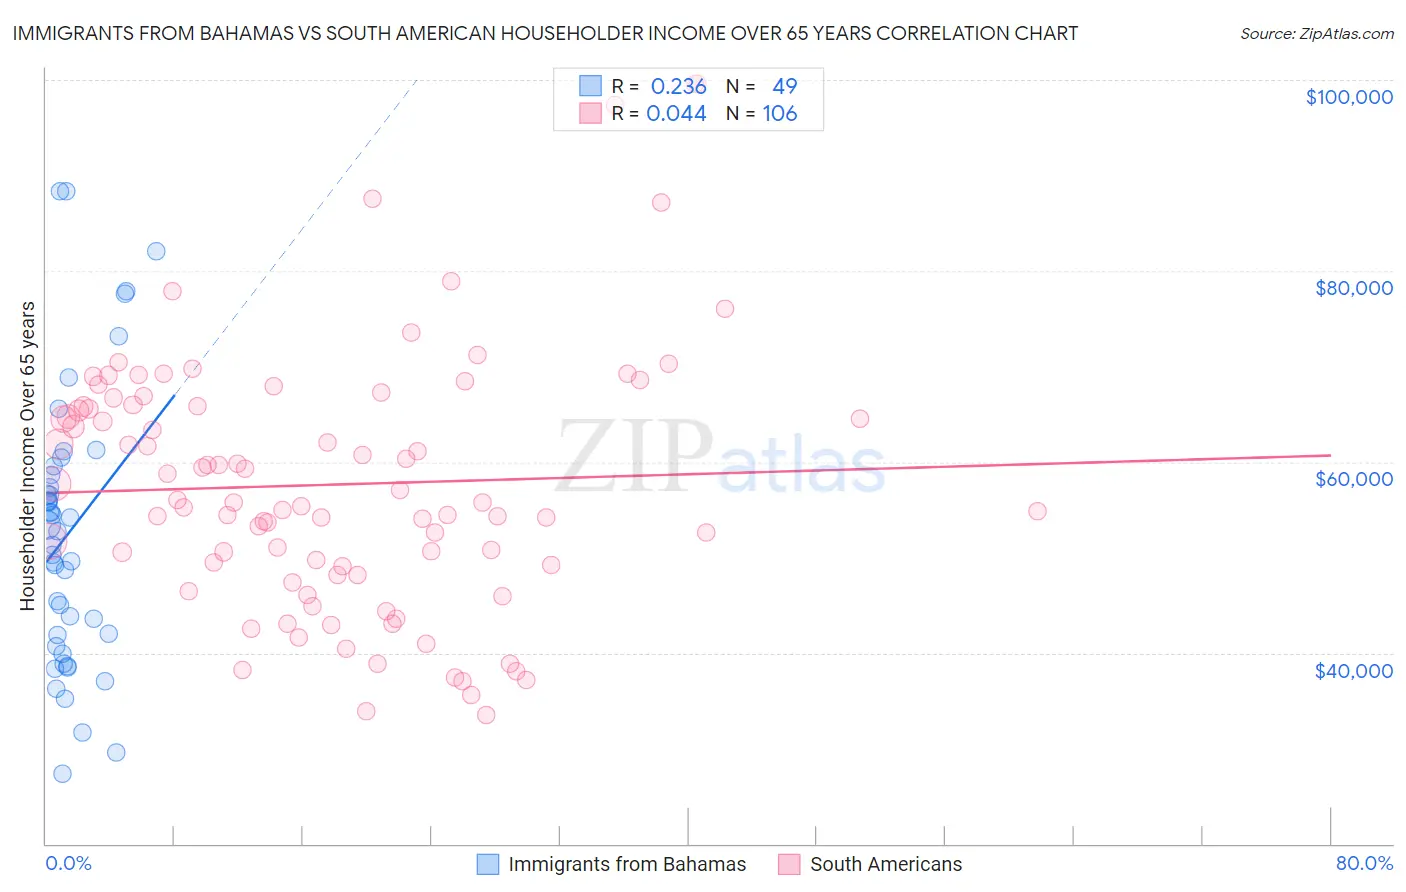 Immigrants from Bahamas vs South American Householder Income Over 65 years